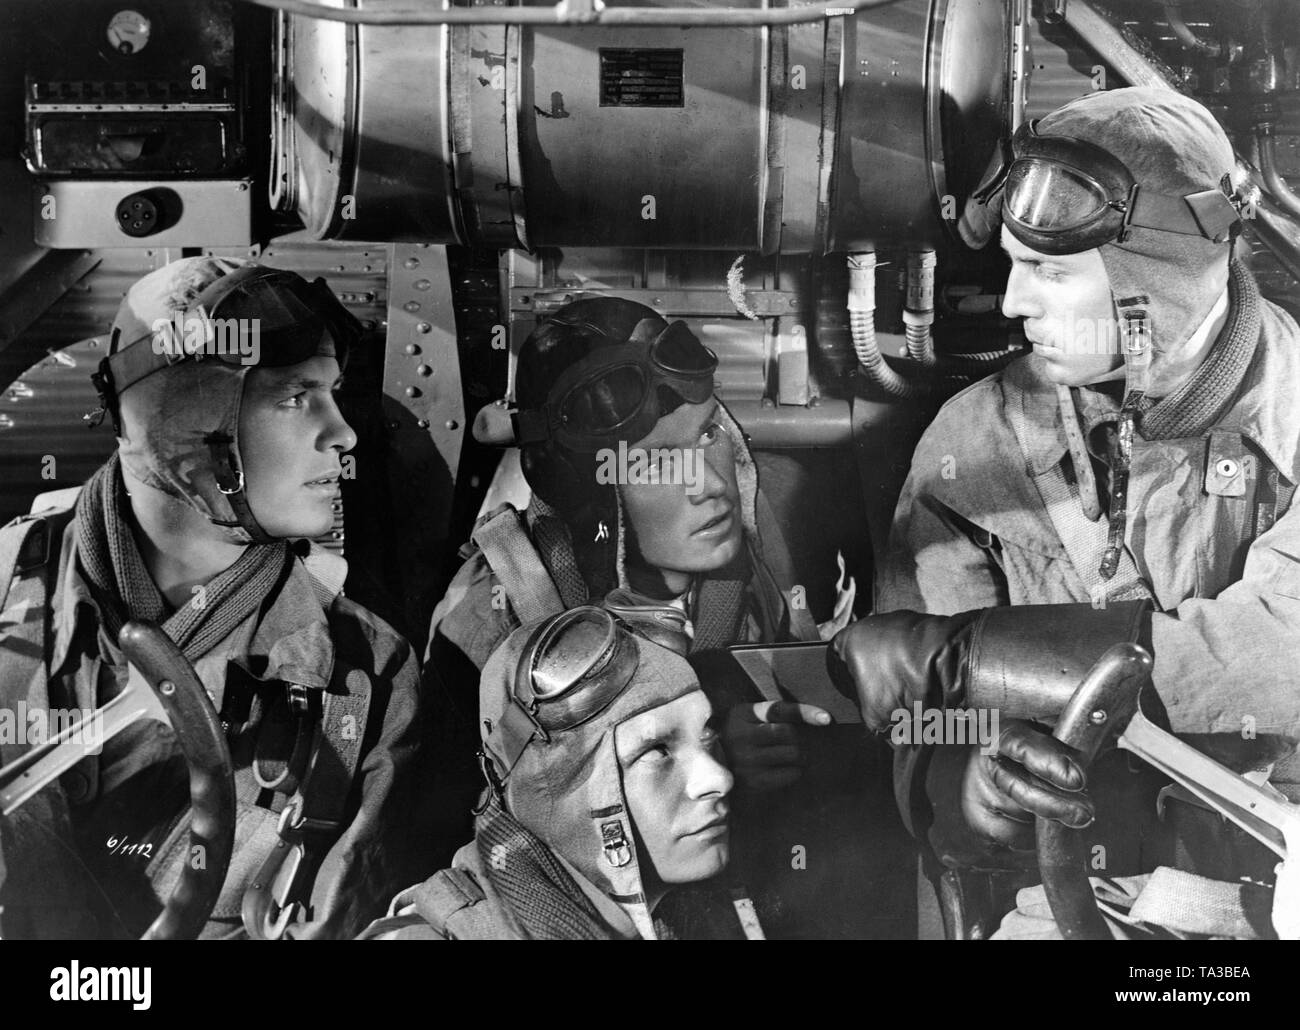 Four soldiers of the Luftwaffe in the cockpit of a Junkers JU-52. It is a moviestill from the National Socialist war and propaganda film 'D III 88', which was shot in 1939 under the direction of Herbert Maisch. Stock Photo